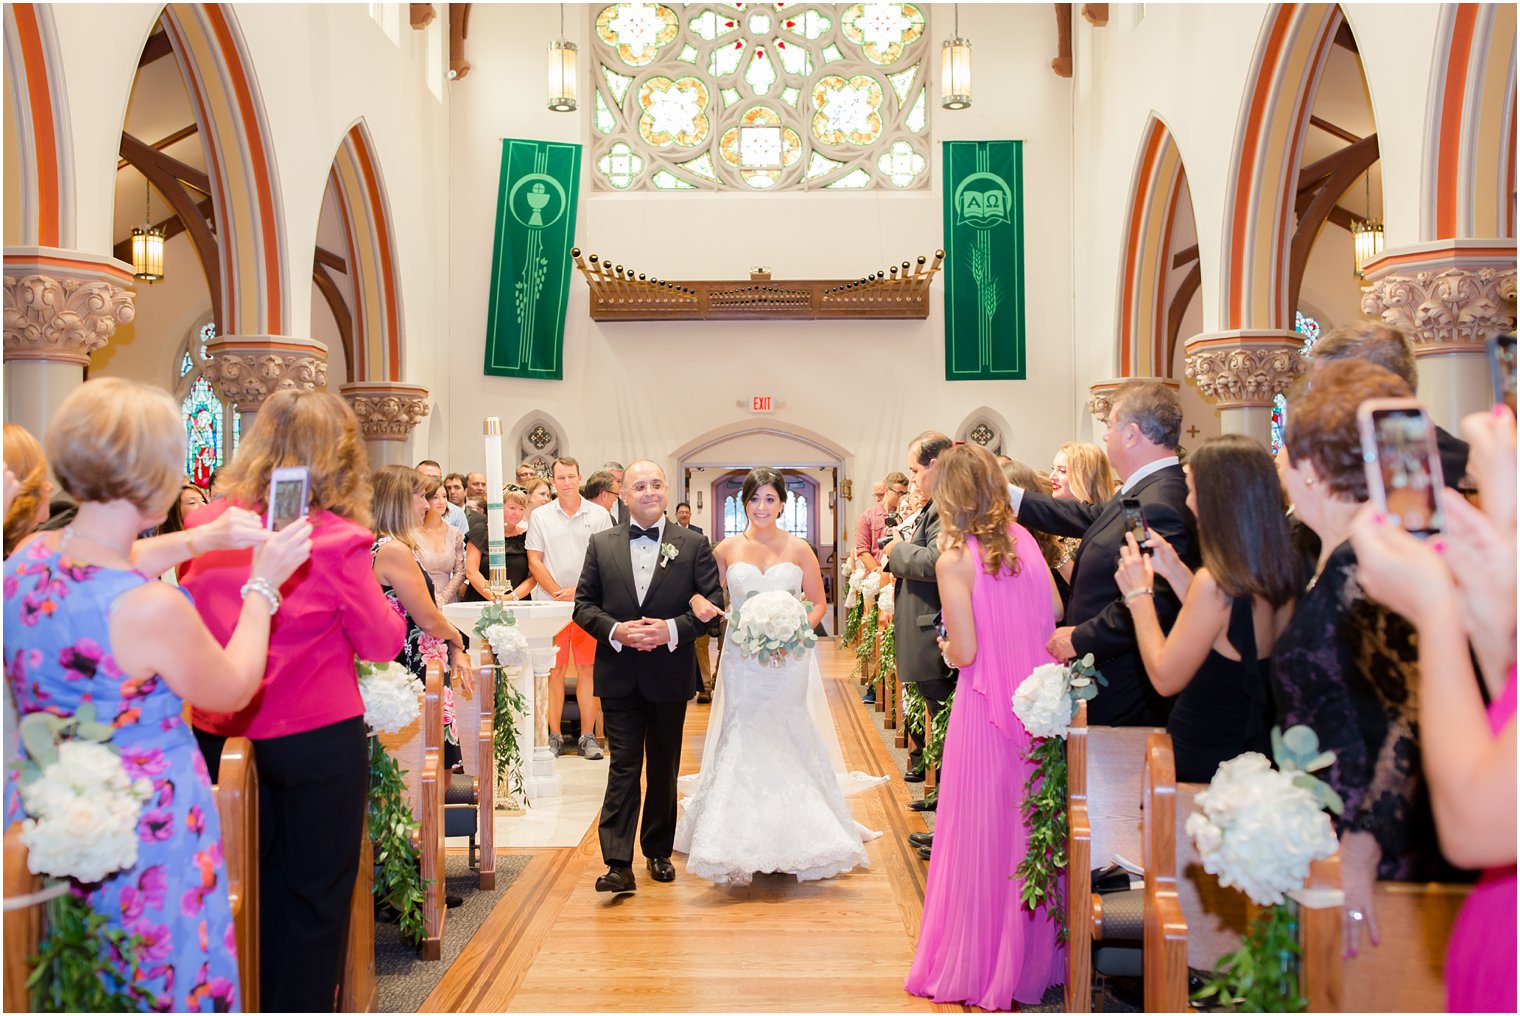 proud father walks daughter down the aisle during NJ wedding day photographed by Idalia Photography